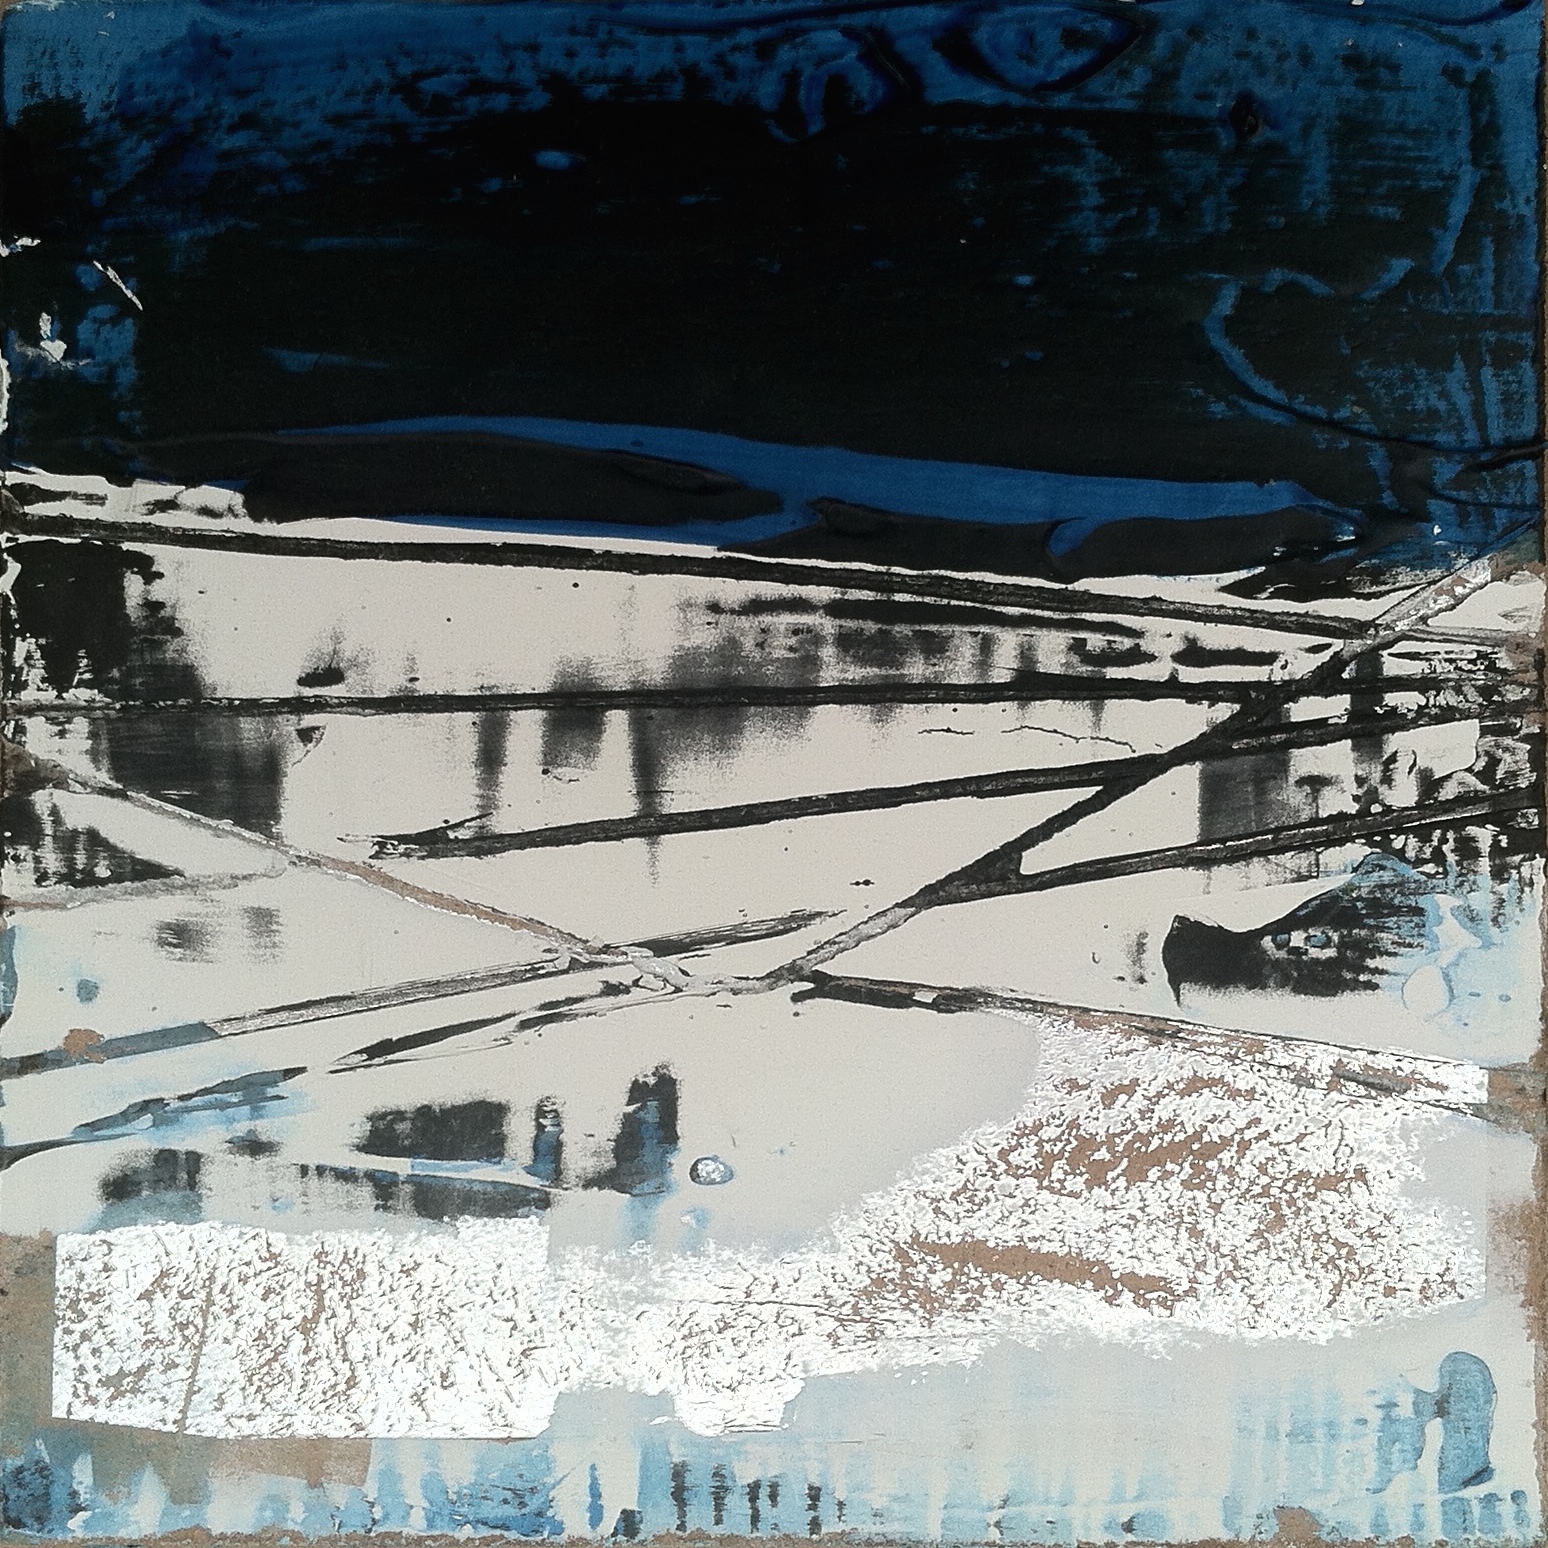   Ice Sheets   6”sq. Mixed Media on Wood Panel 